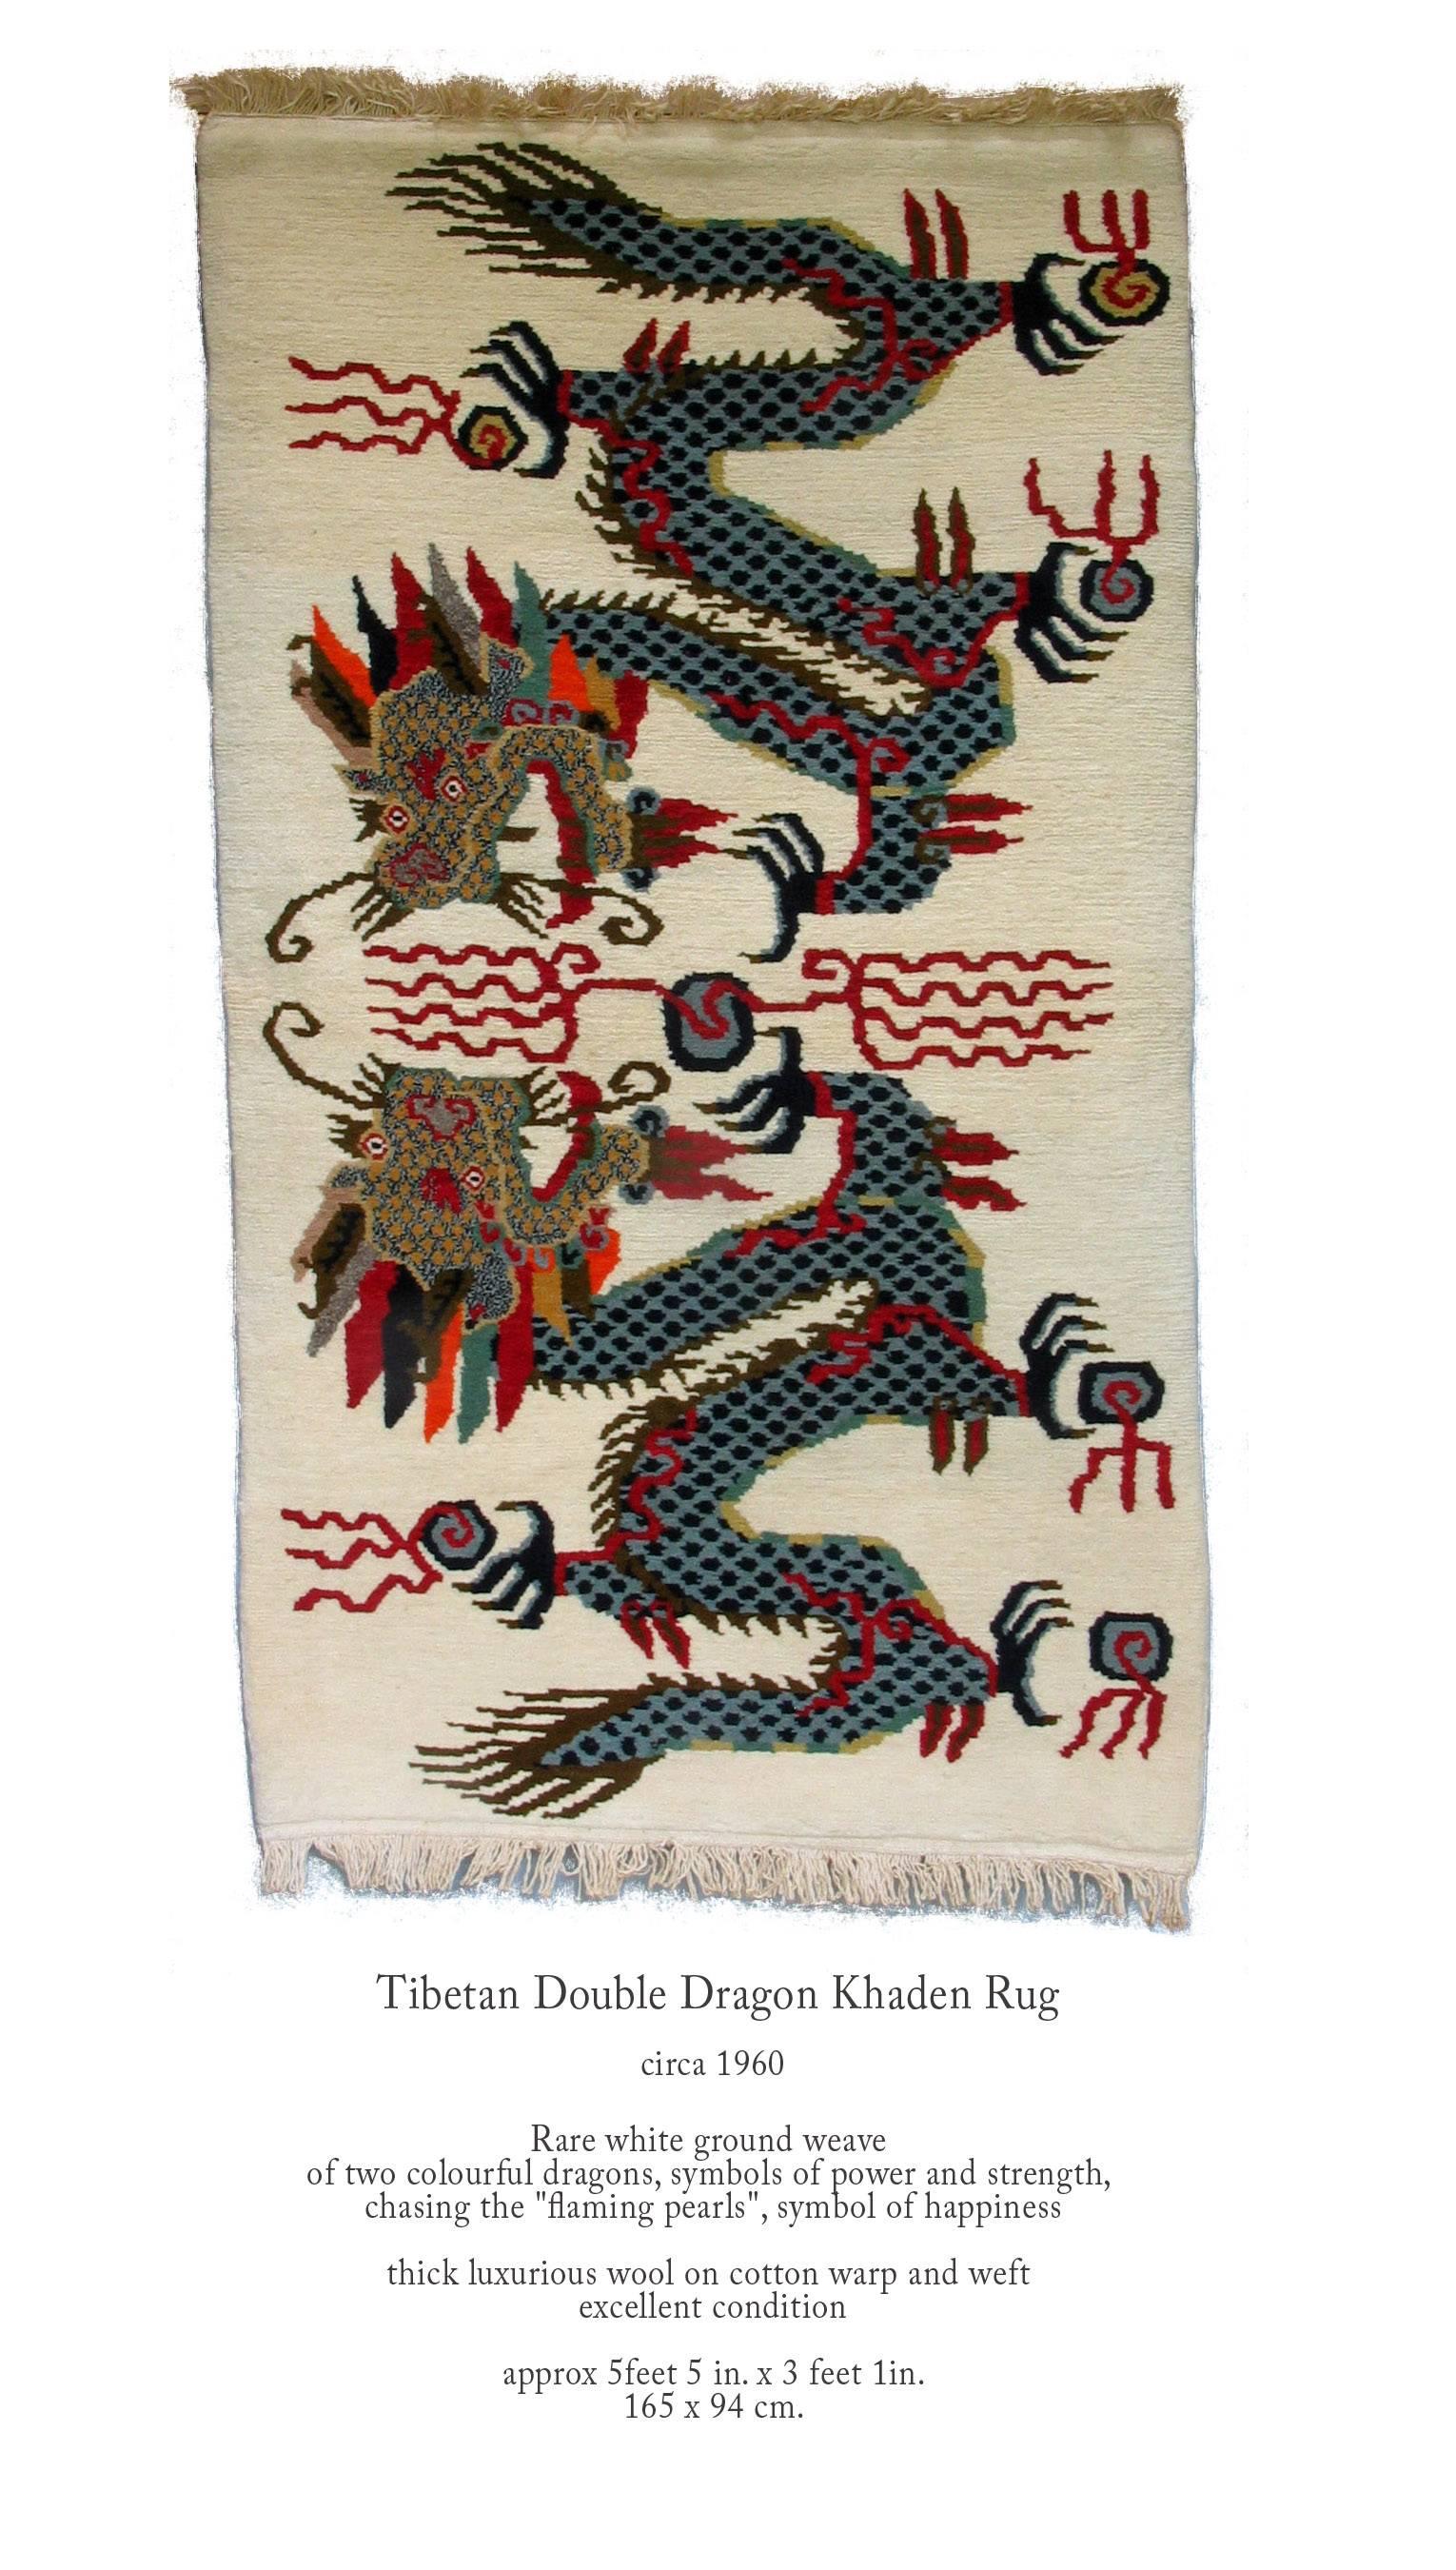 Tibetan double dragon Khaden rug, circa 1960, rare white ground weave of two colorful dragons, symbols of power and strength, they are chasing the 